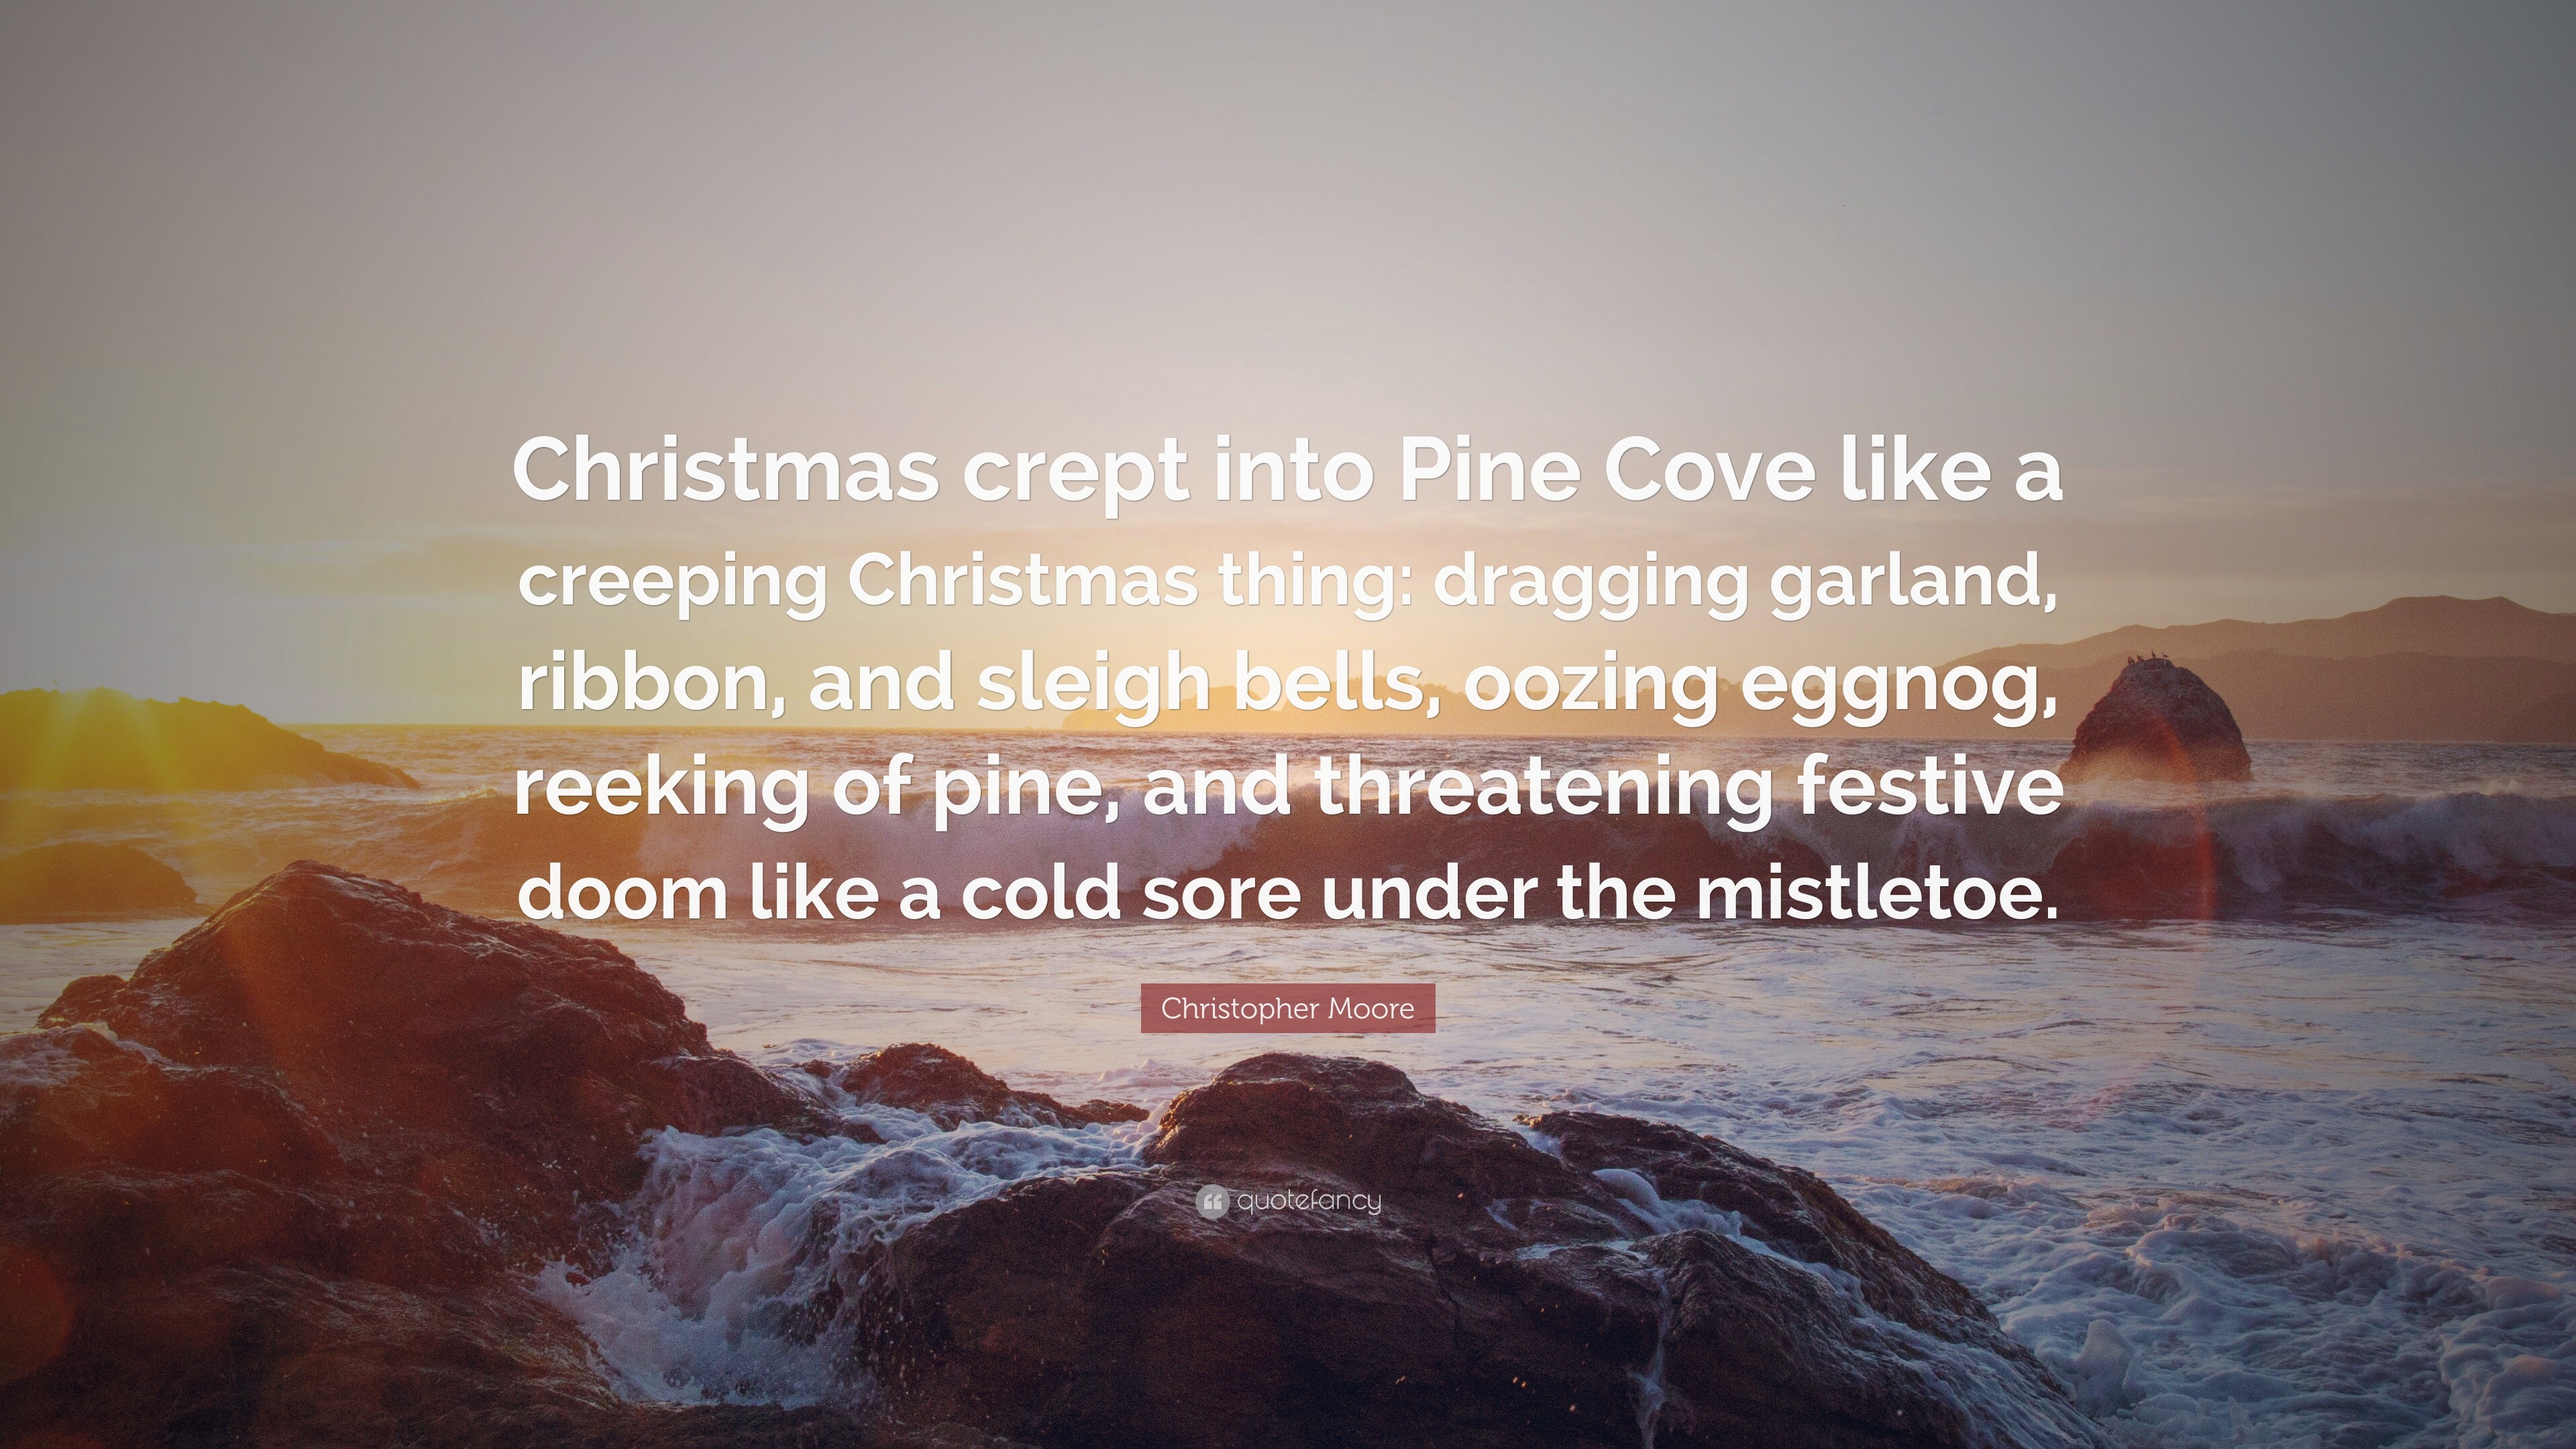 Christopher Moore Quote: “Christmas crept into Pine Cove like a ...